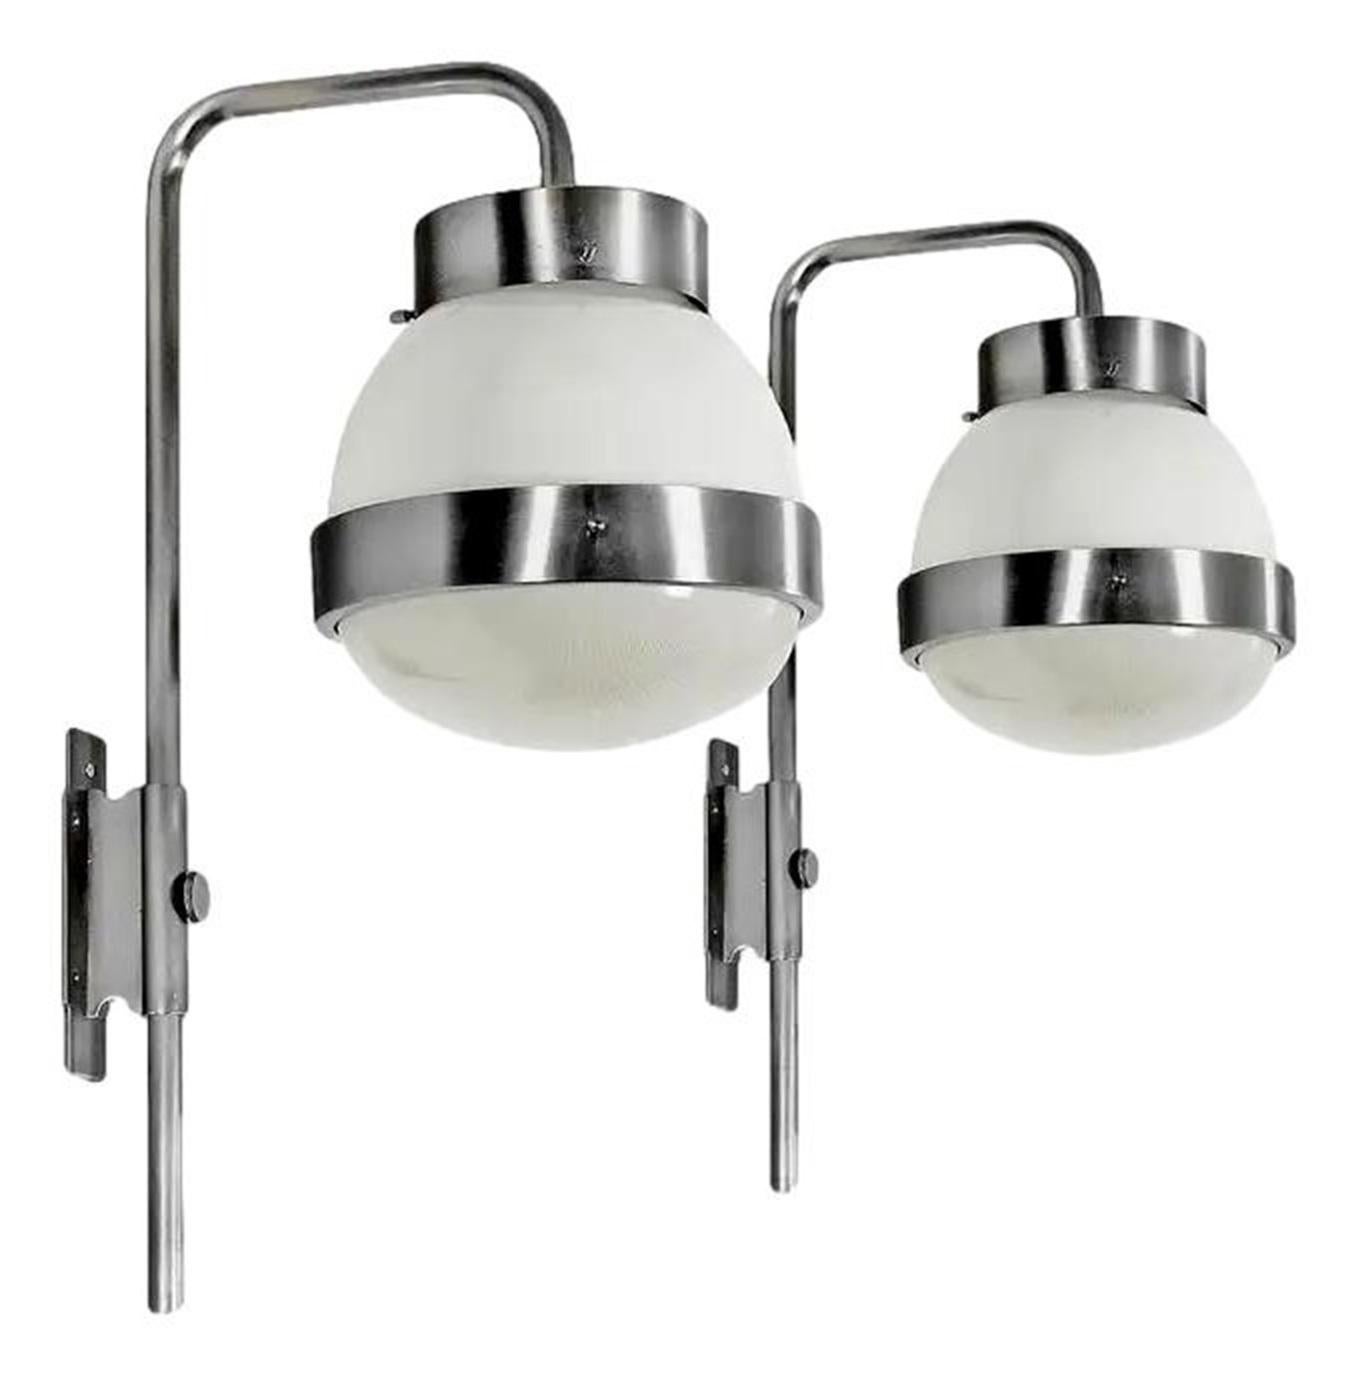 Mid-Century Modern pair of wall sconces - wall lamps 